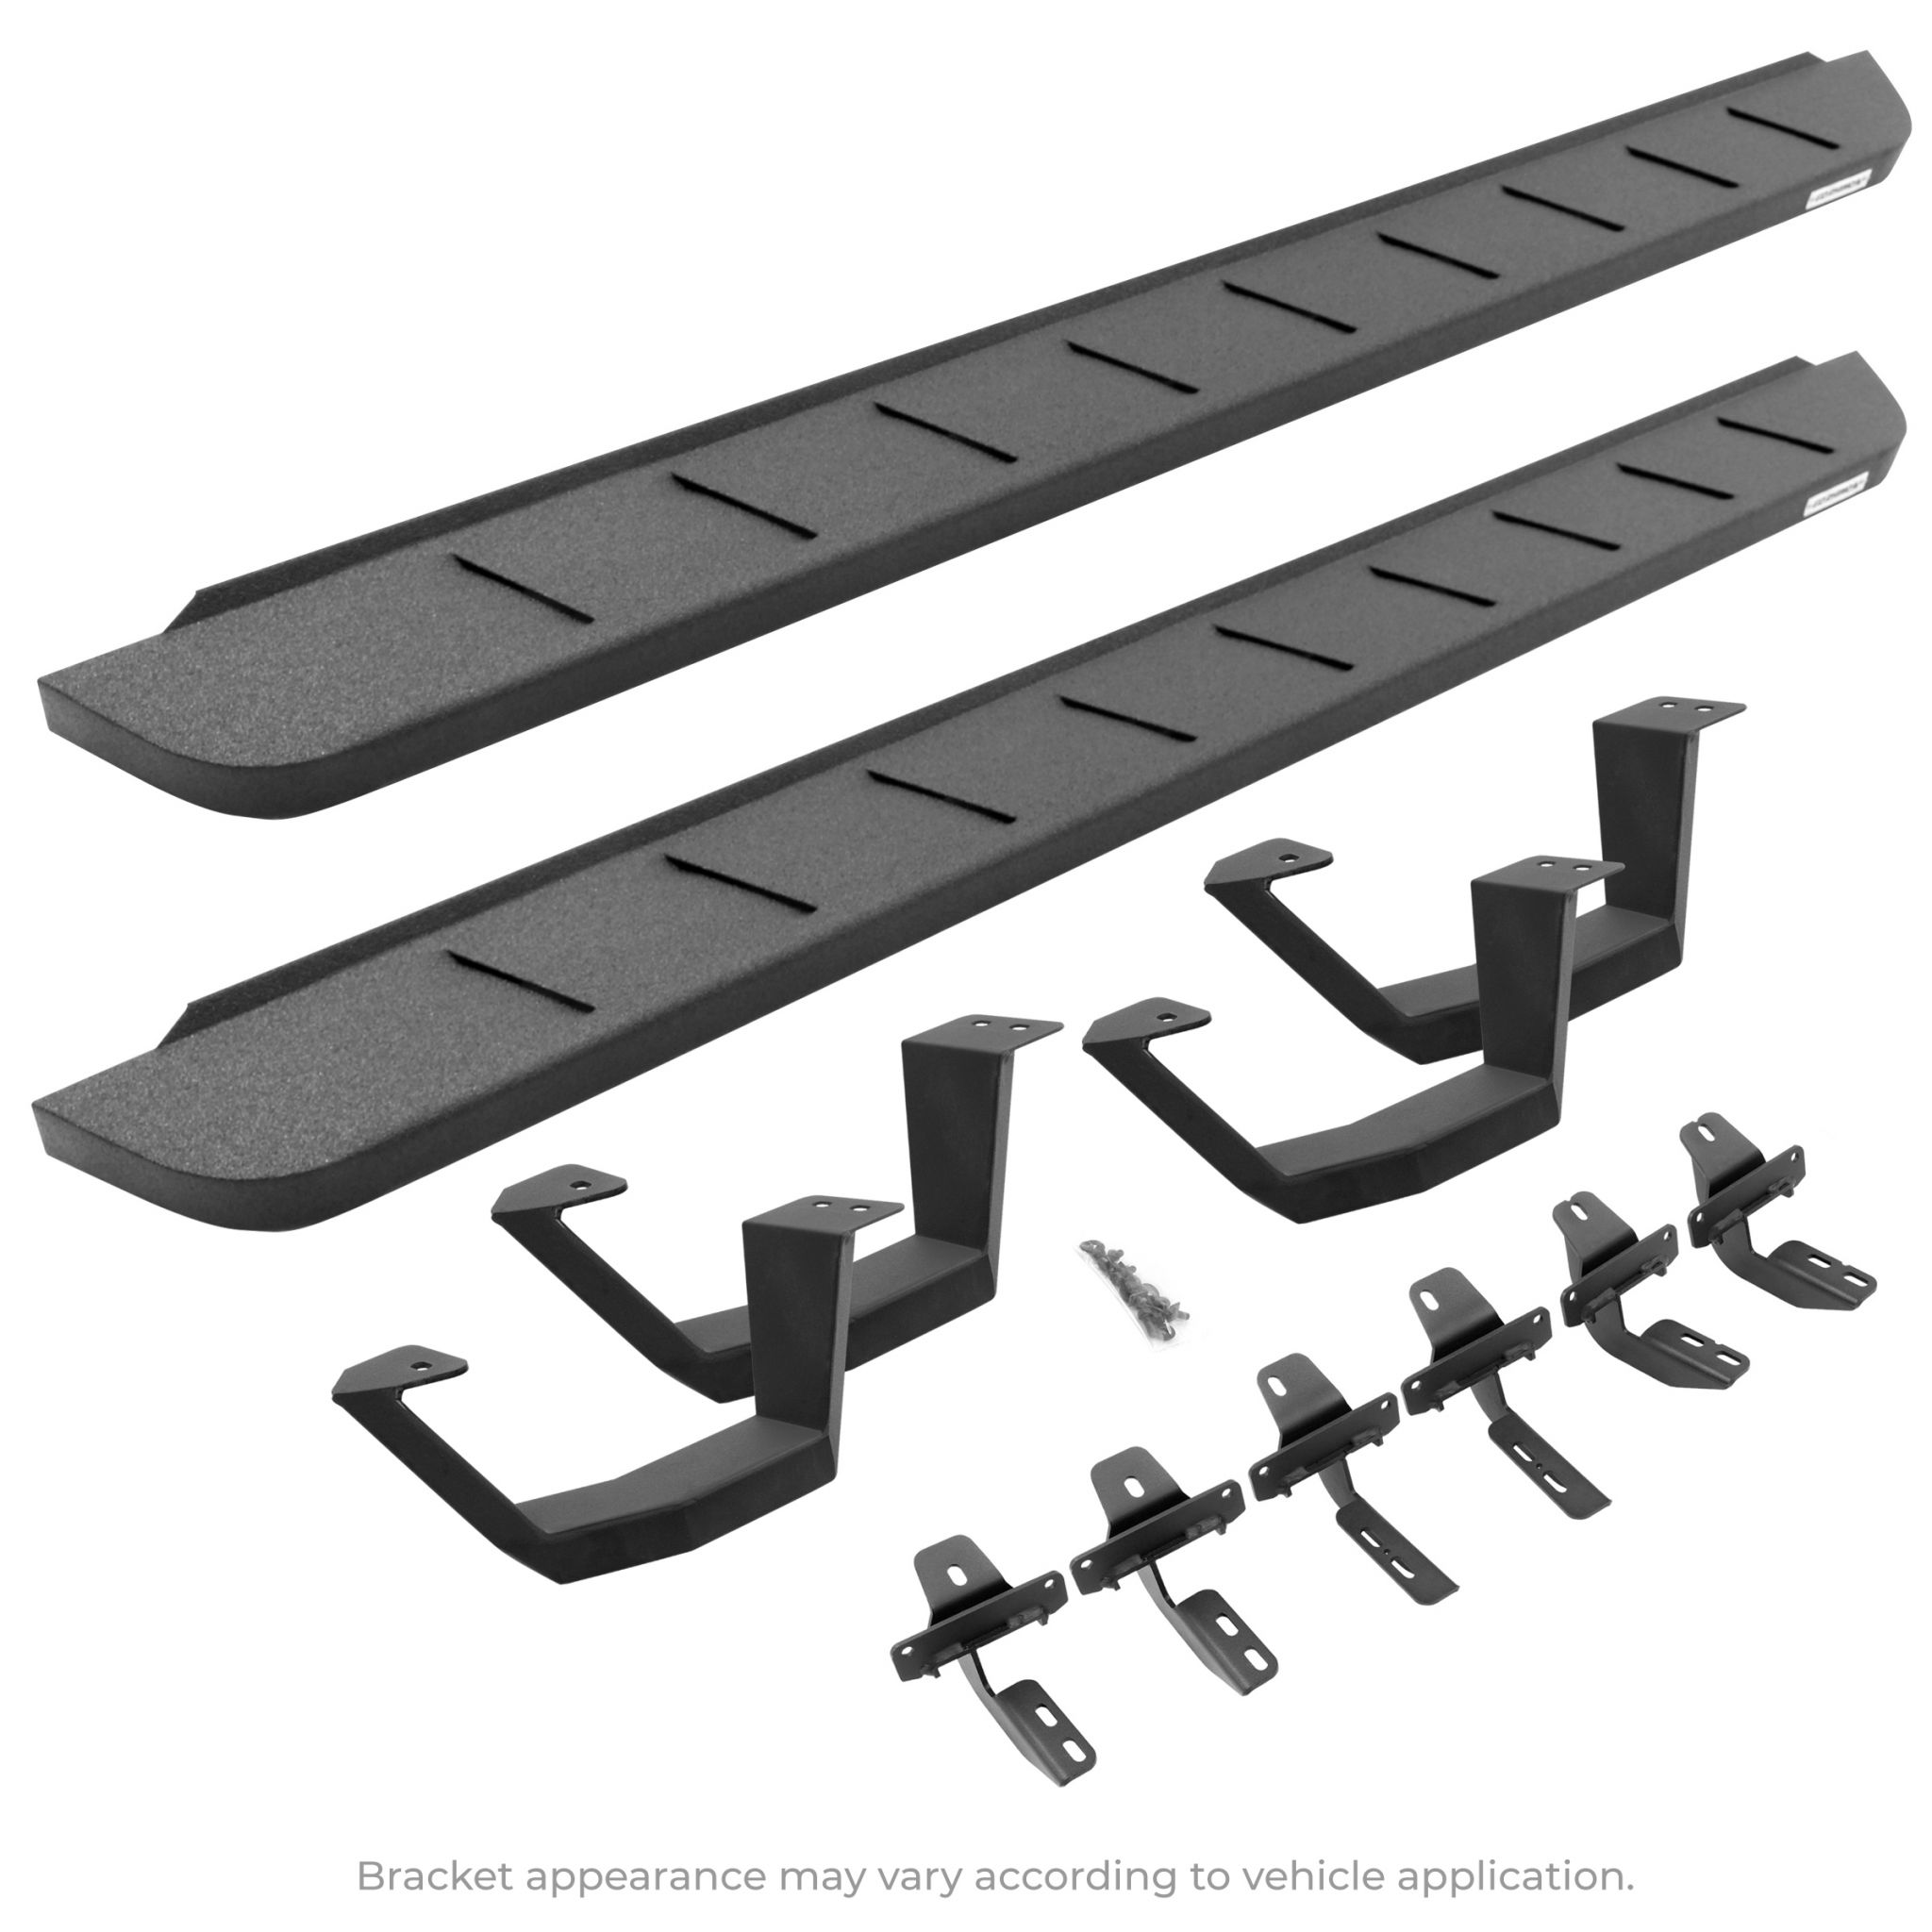 Go Rhino 6341808720T - RB10 Running Boards With Mounting Brackets & 2 Pairs of Drop Steps Kit - Protective Bedliner Coating